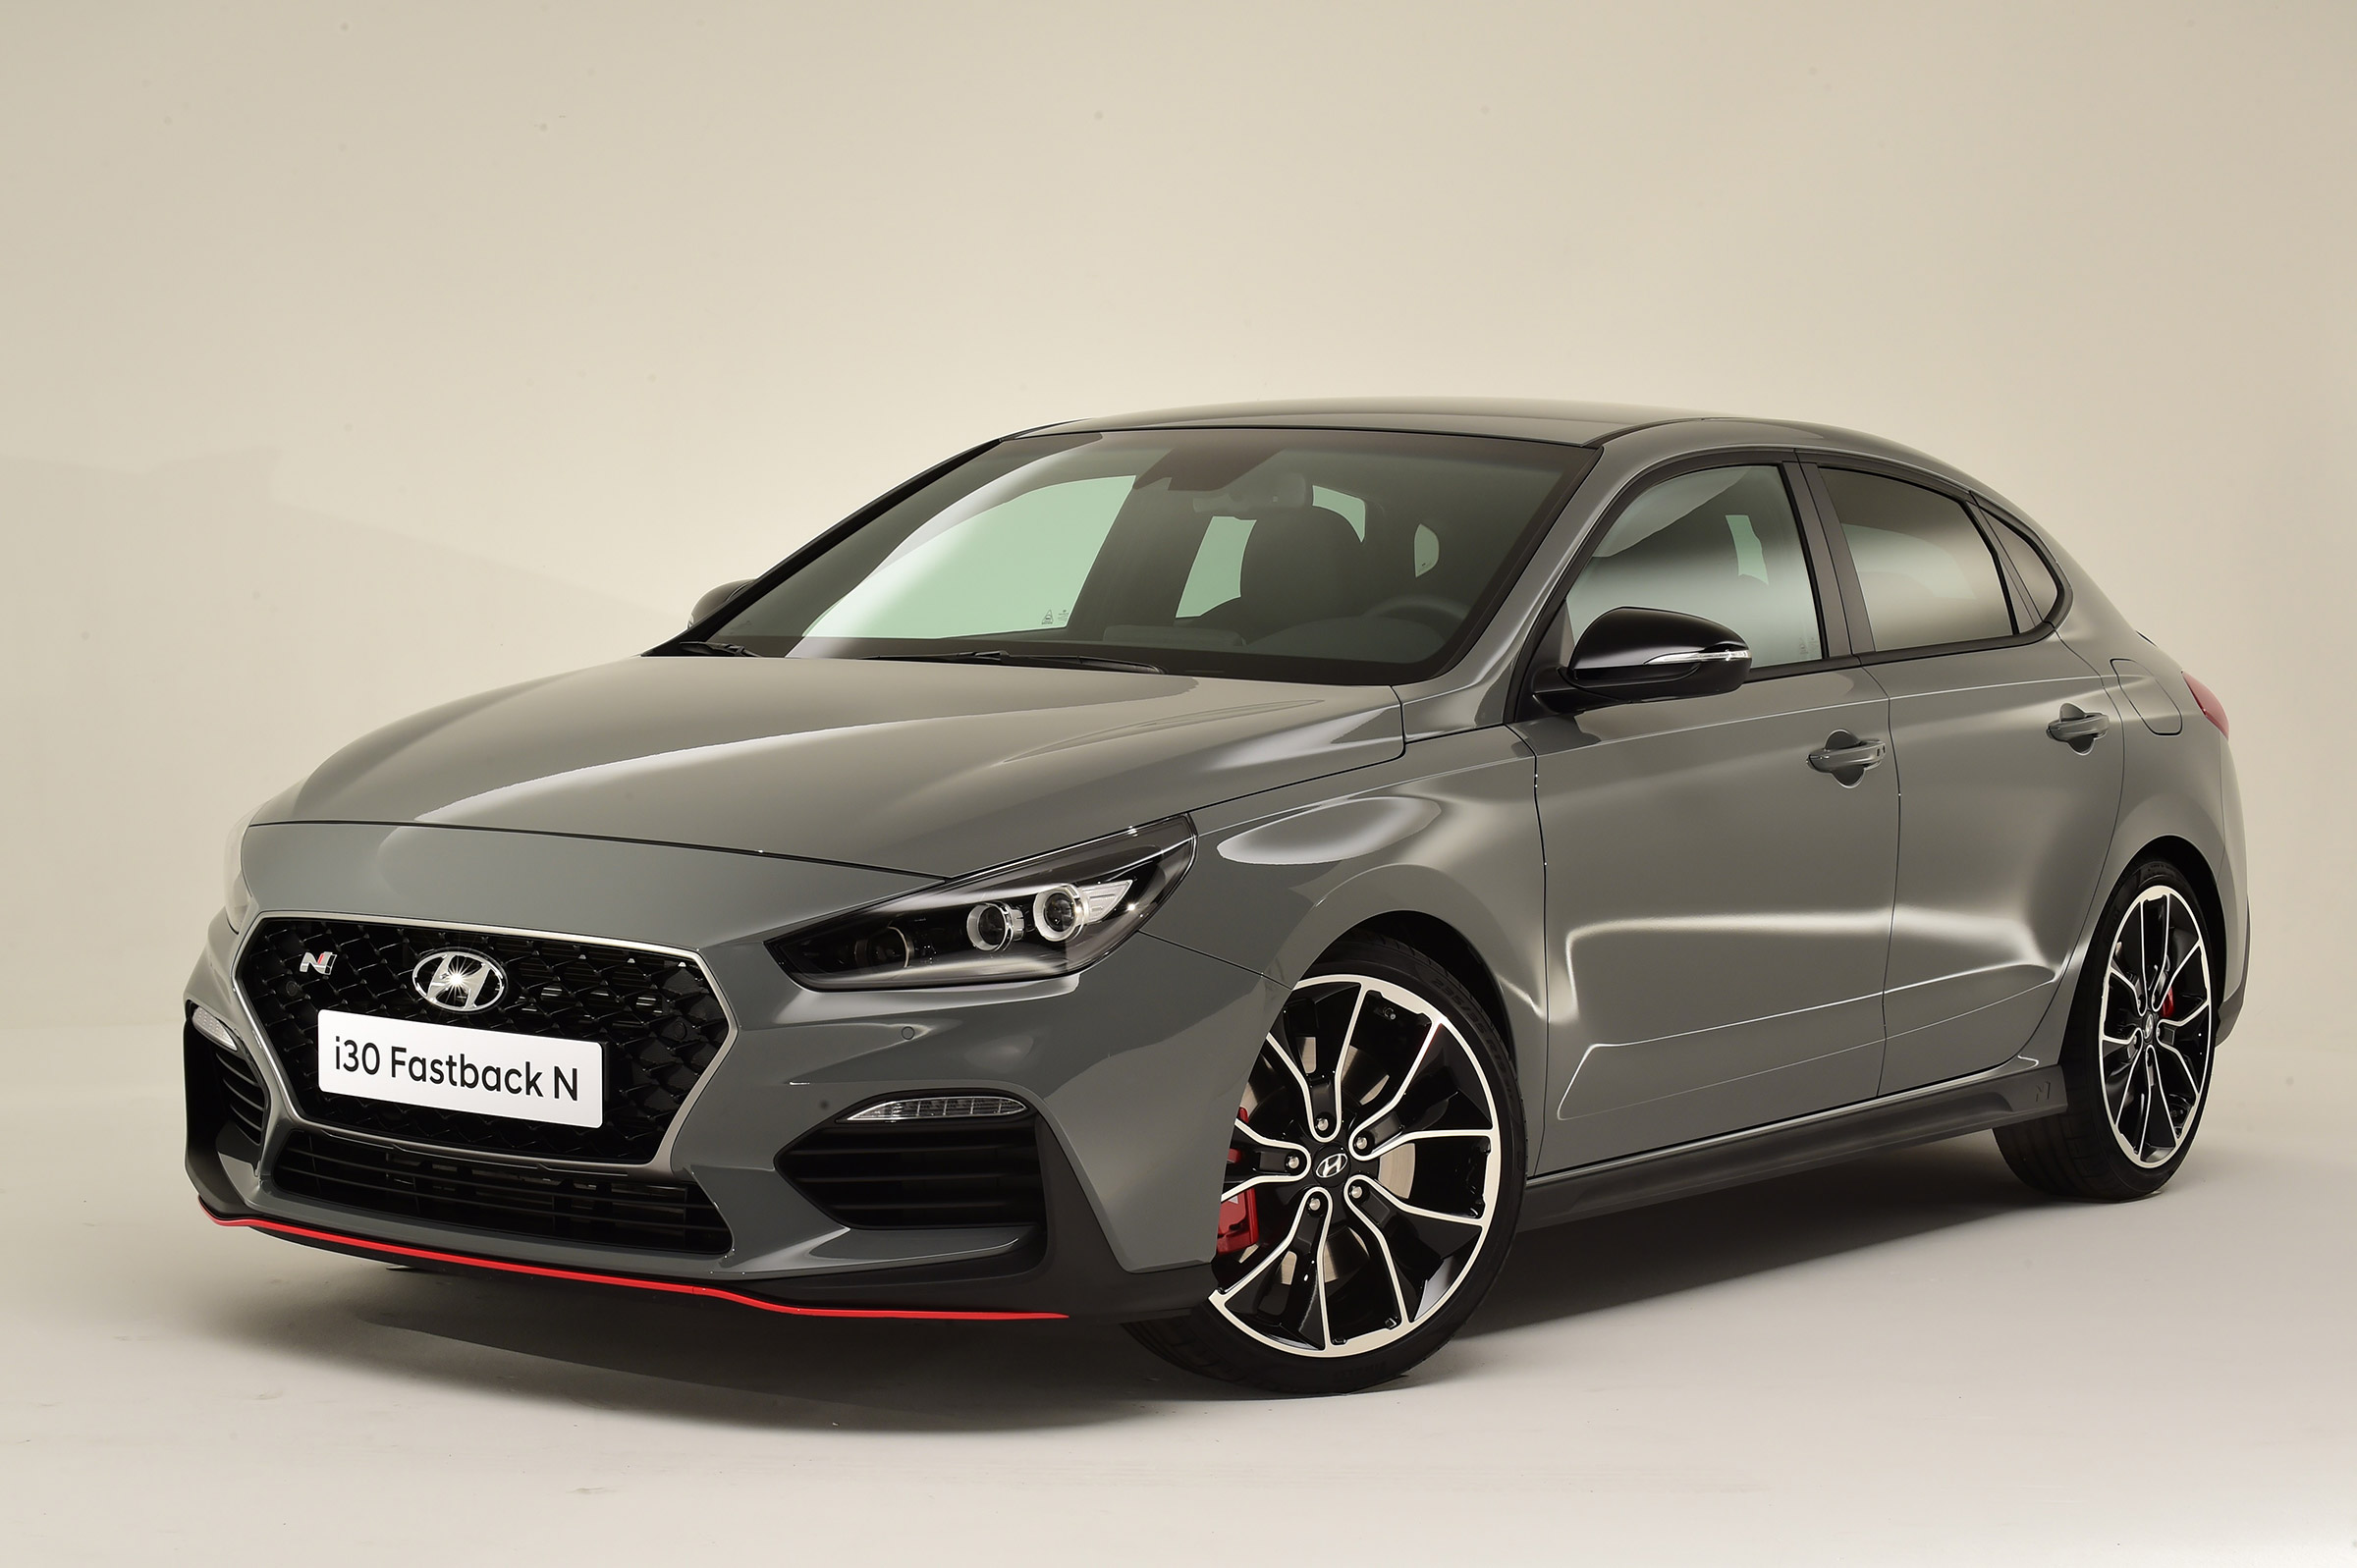 Hyundai i30 Fastback N priced from £29,995 to rival Kia Proceed